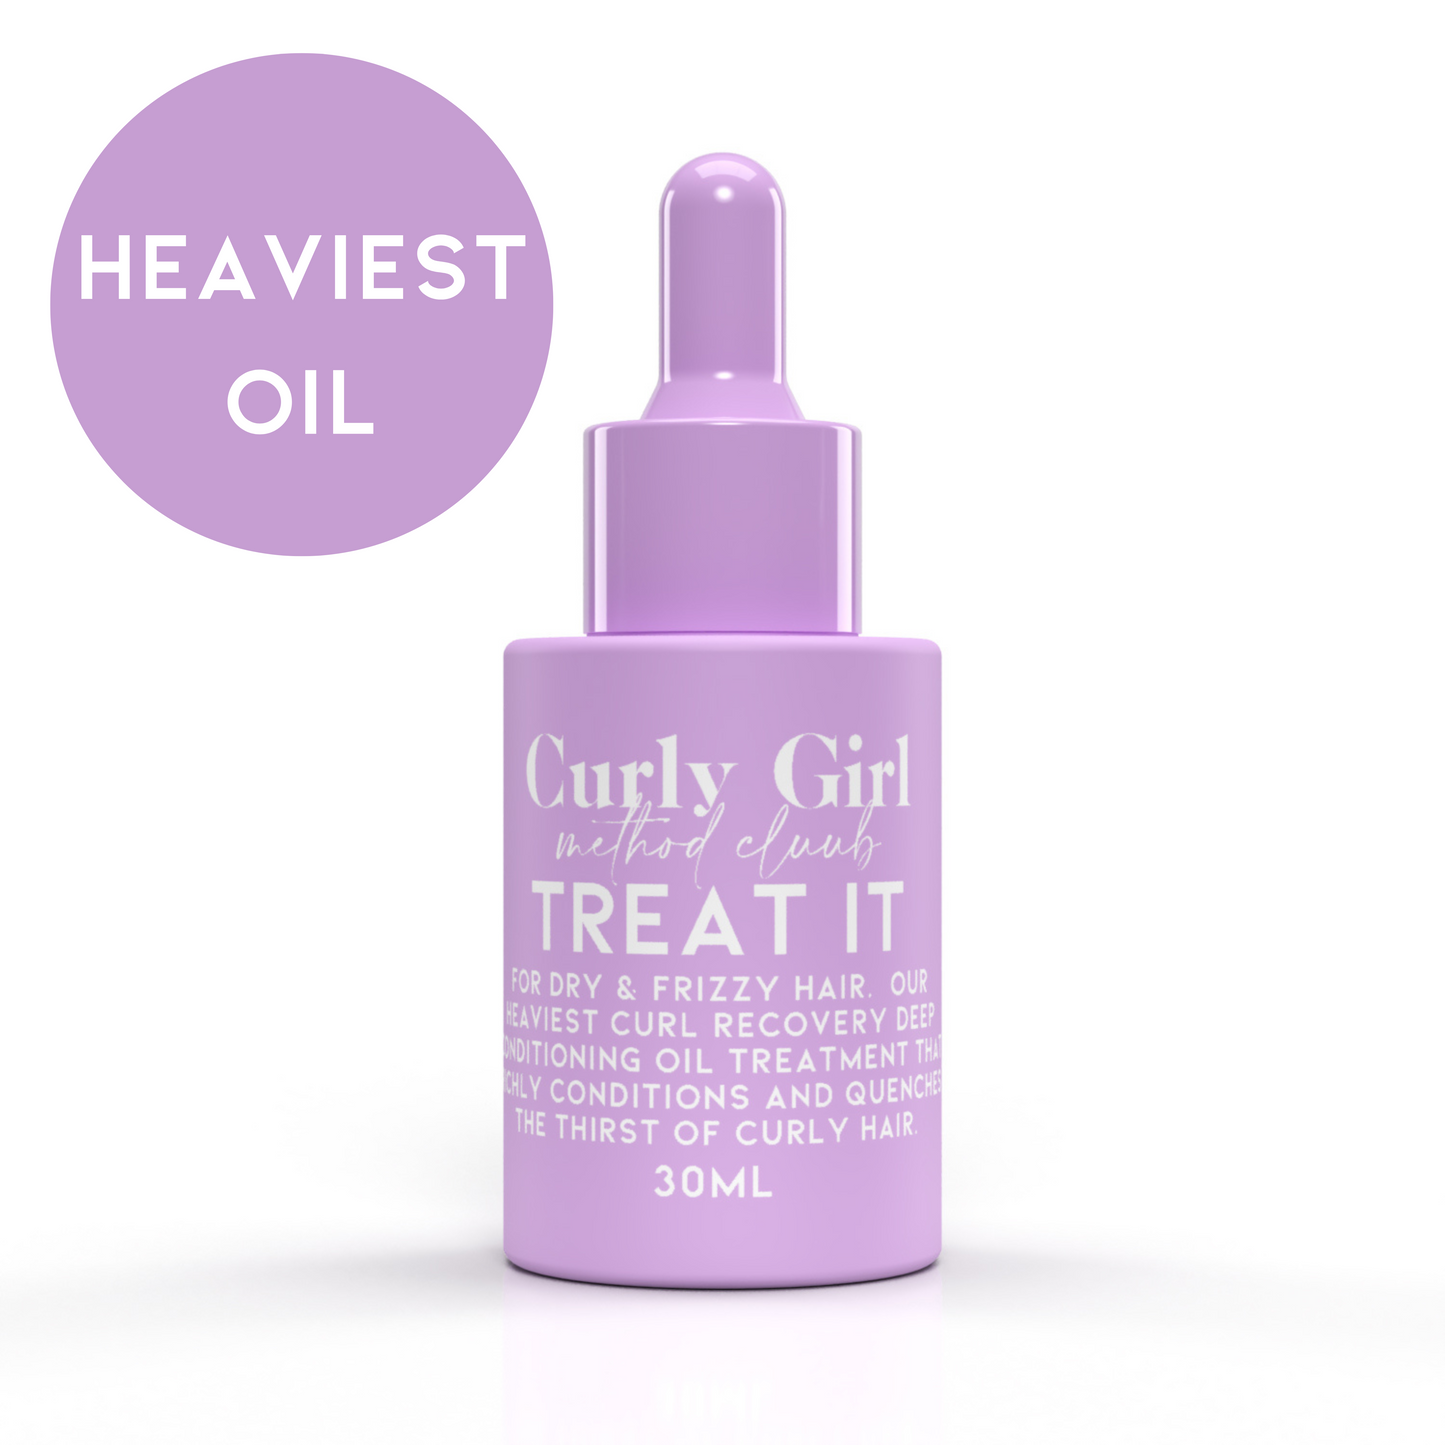 Step 6: Treat It 30ml Deep Conditioning Treatment for dry hair